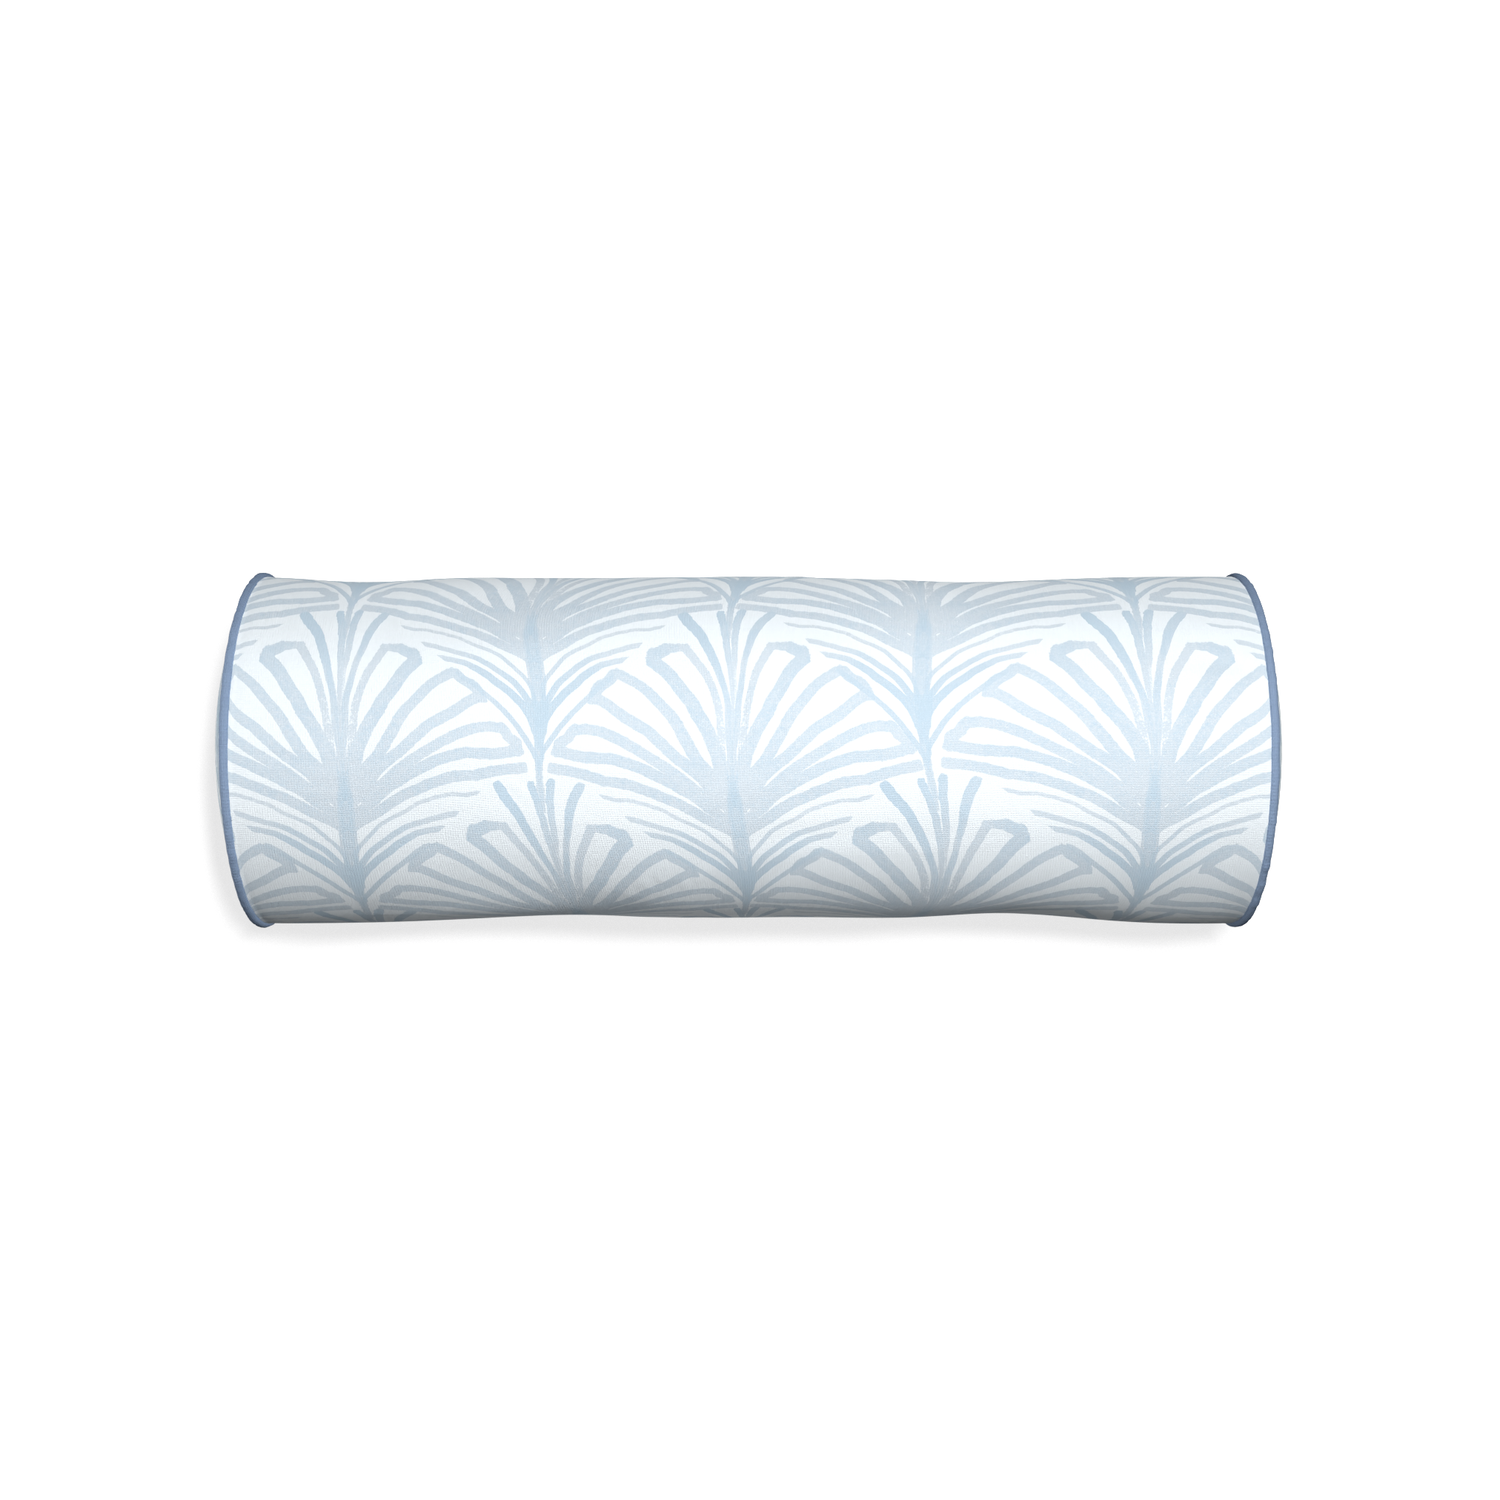 Bolster suzy sky custom sky blue palmpillow with sky piping on white background